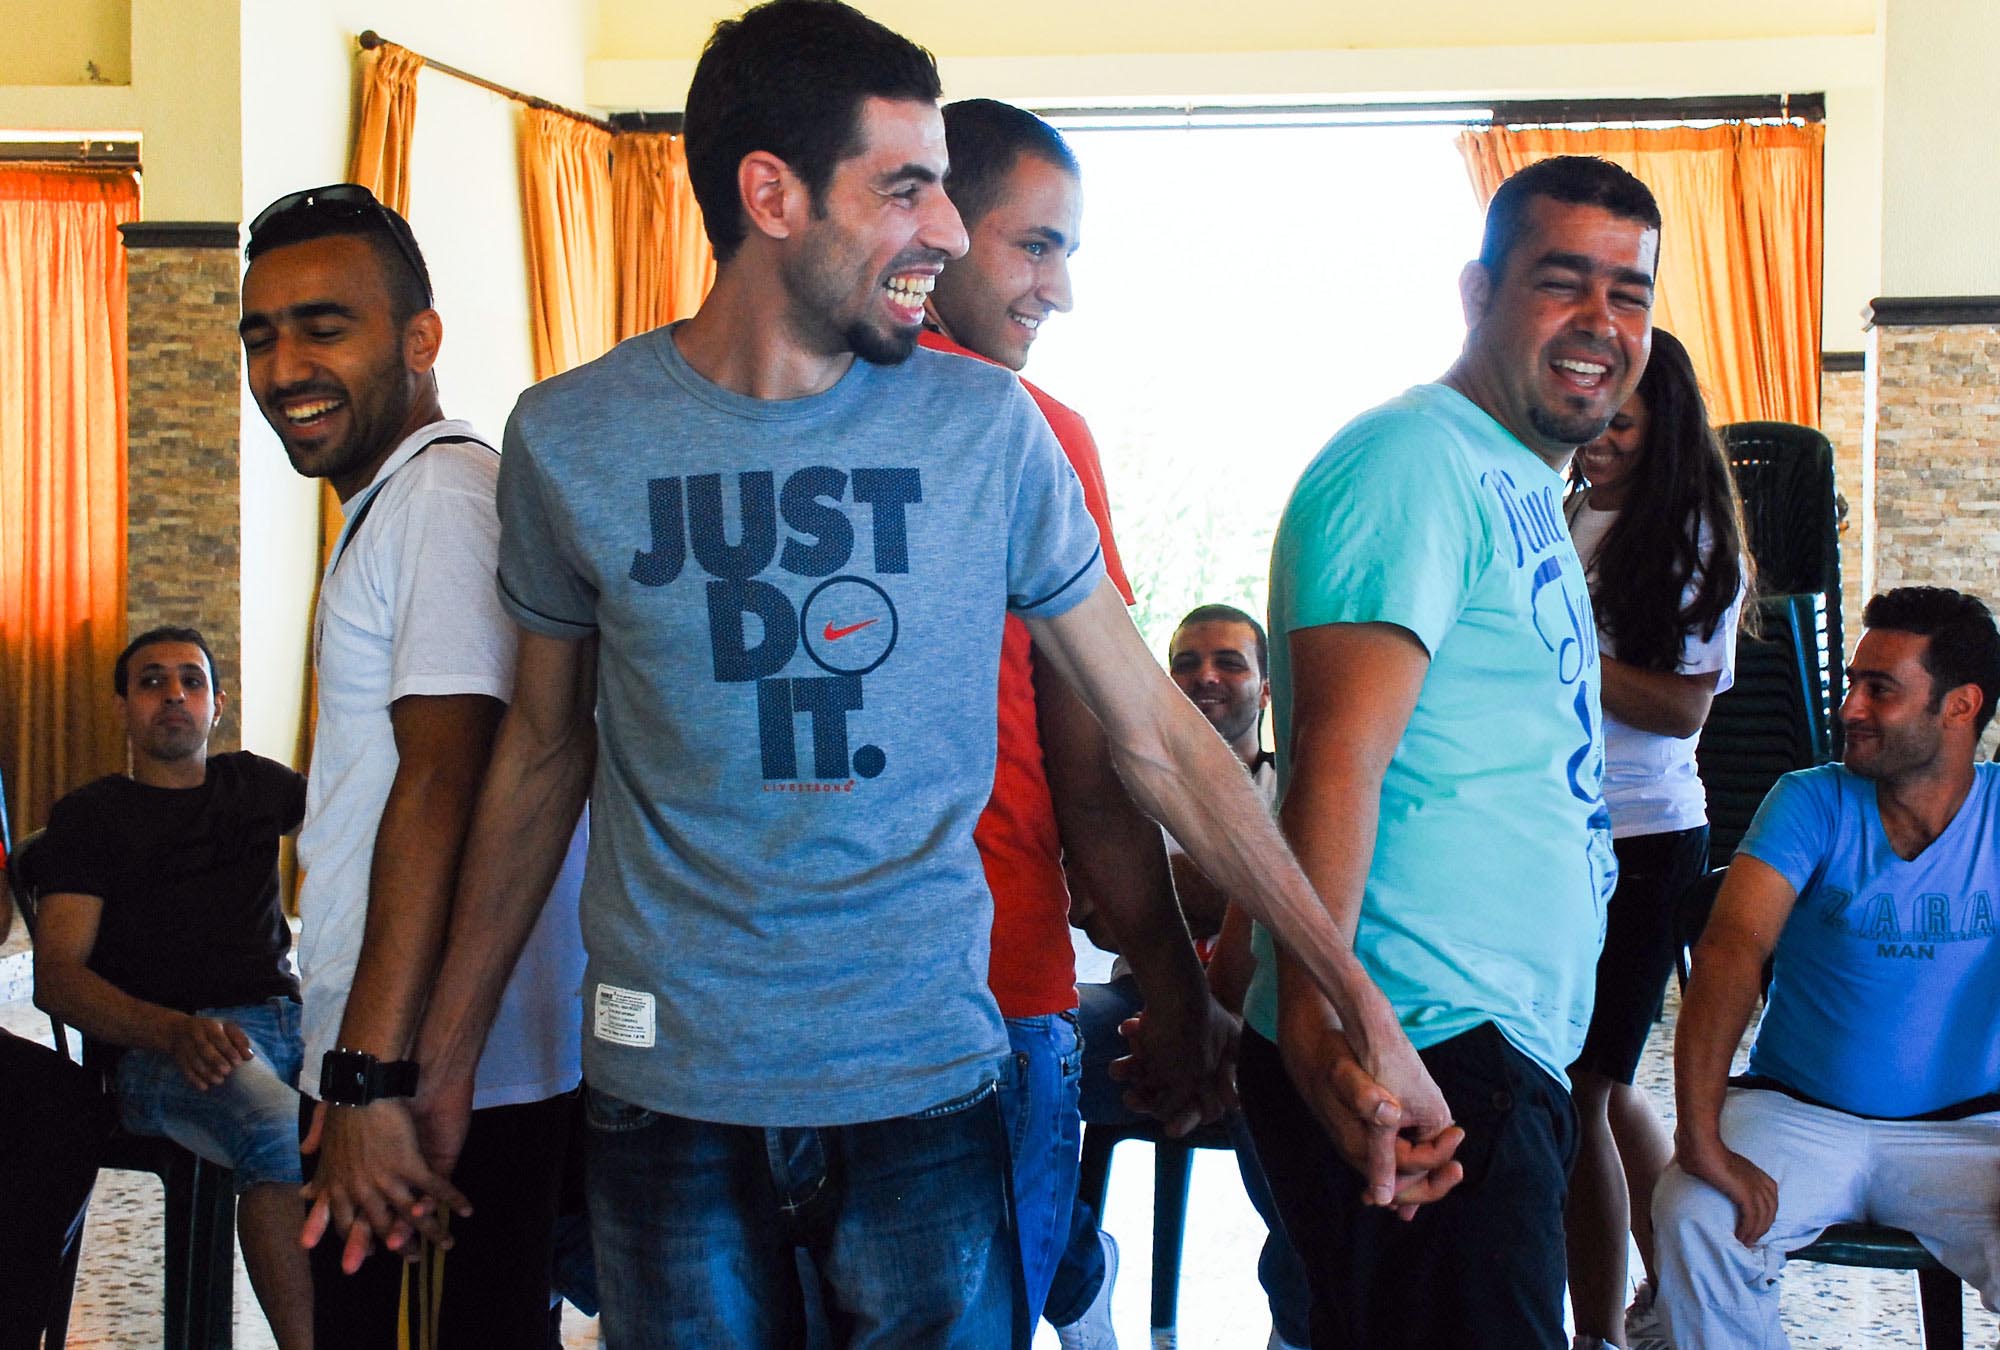 24 soccer coaches use group games to learn how to resolve their differences at Anera's conflict resolution workshop in Lebanon.